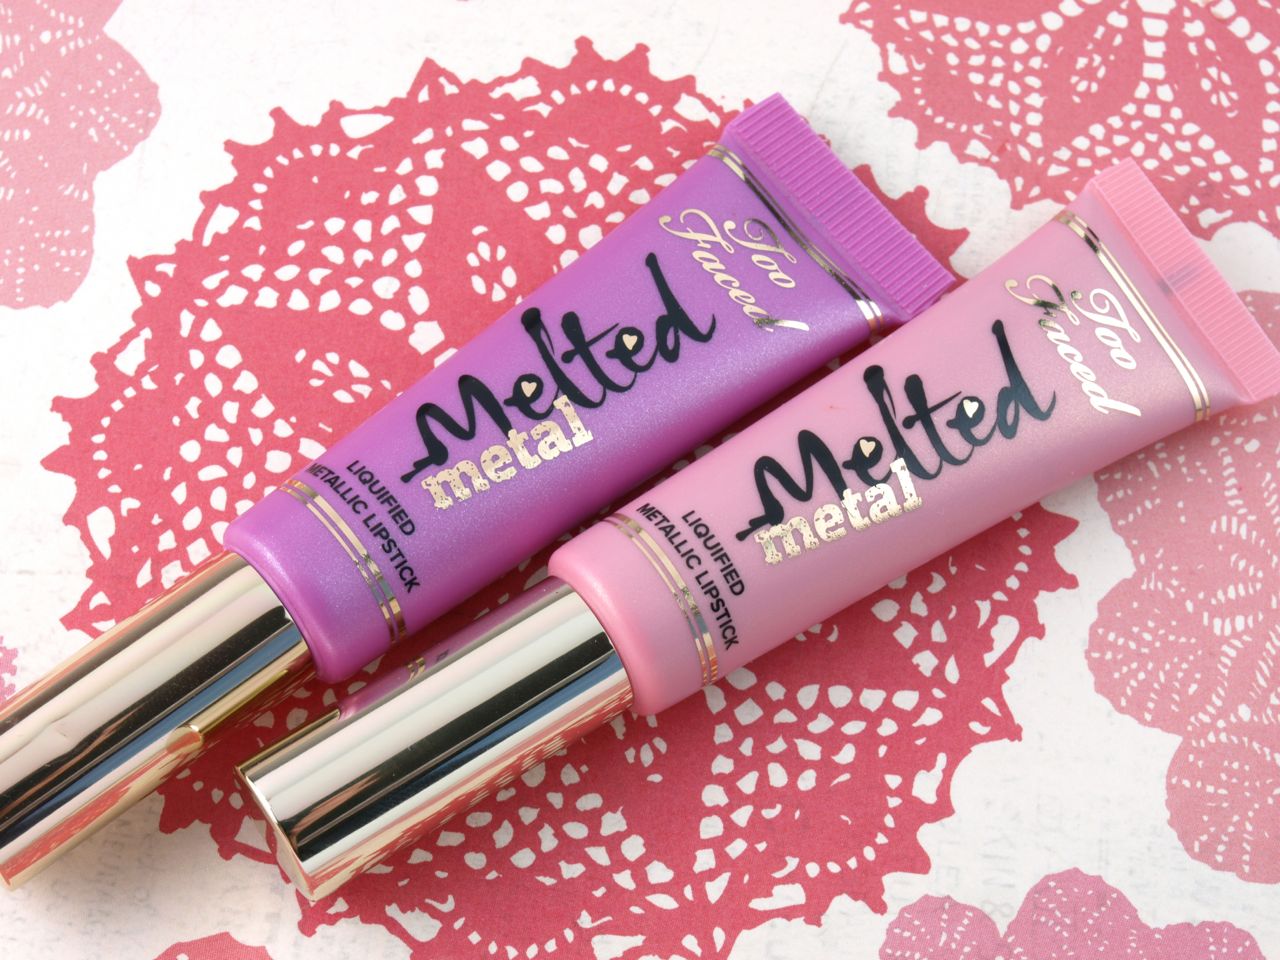 Too Faced Melted Metal Liquified Metallic Lipstick in "Melted Metallic Peony" & "Melted Metallic Violet": Review and Swatches